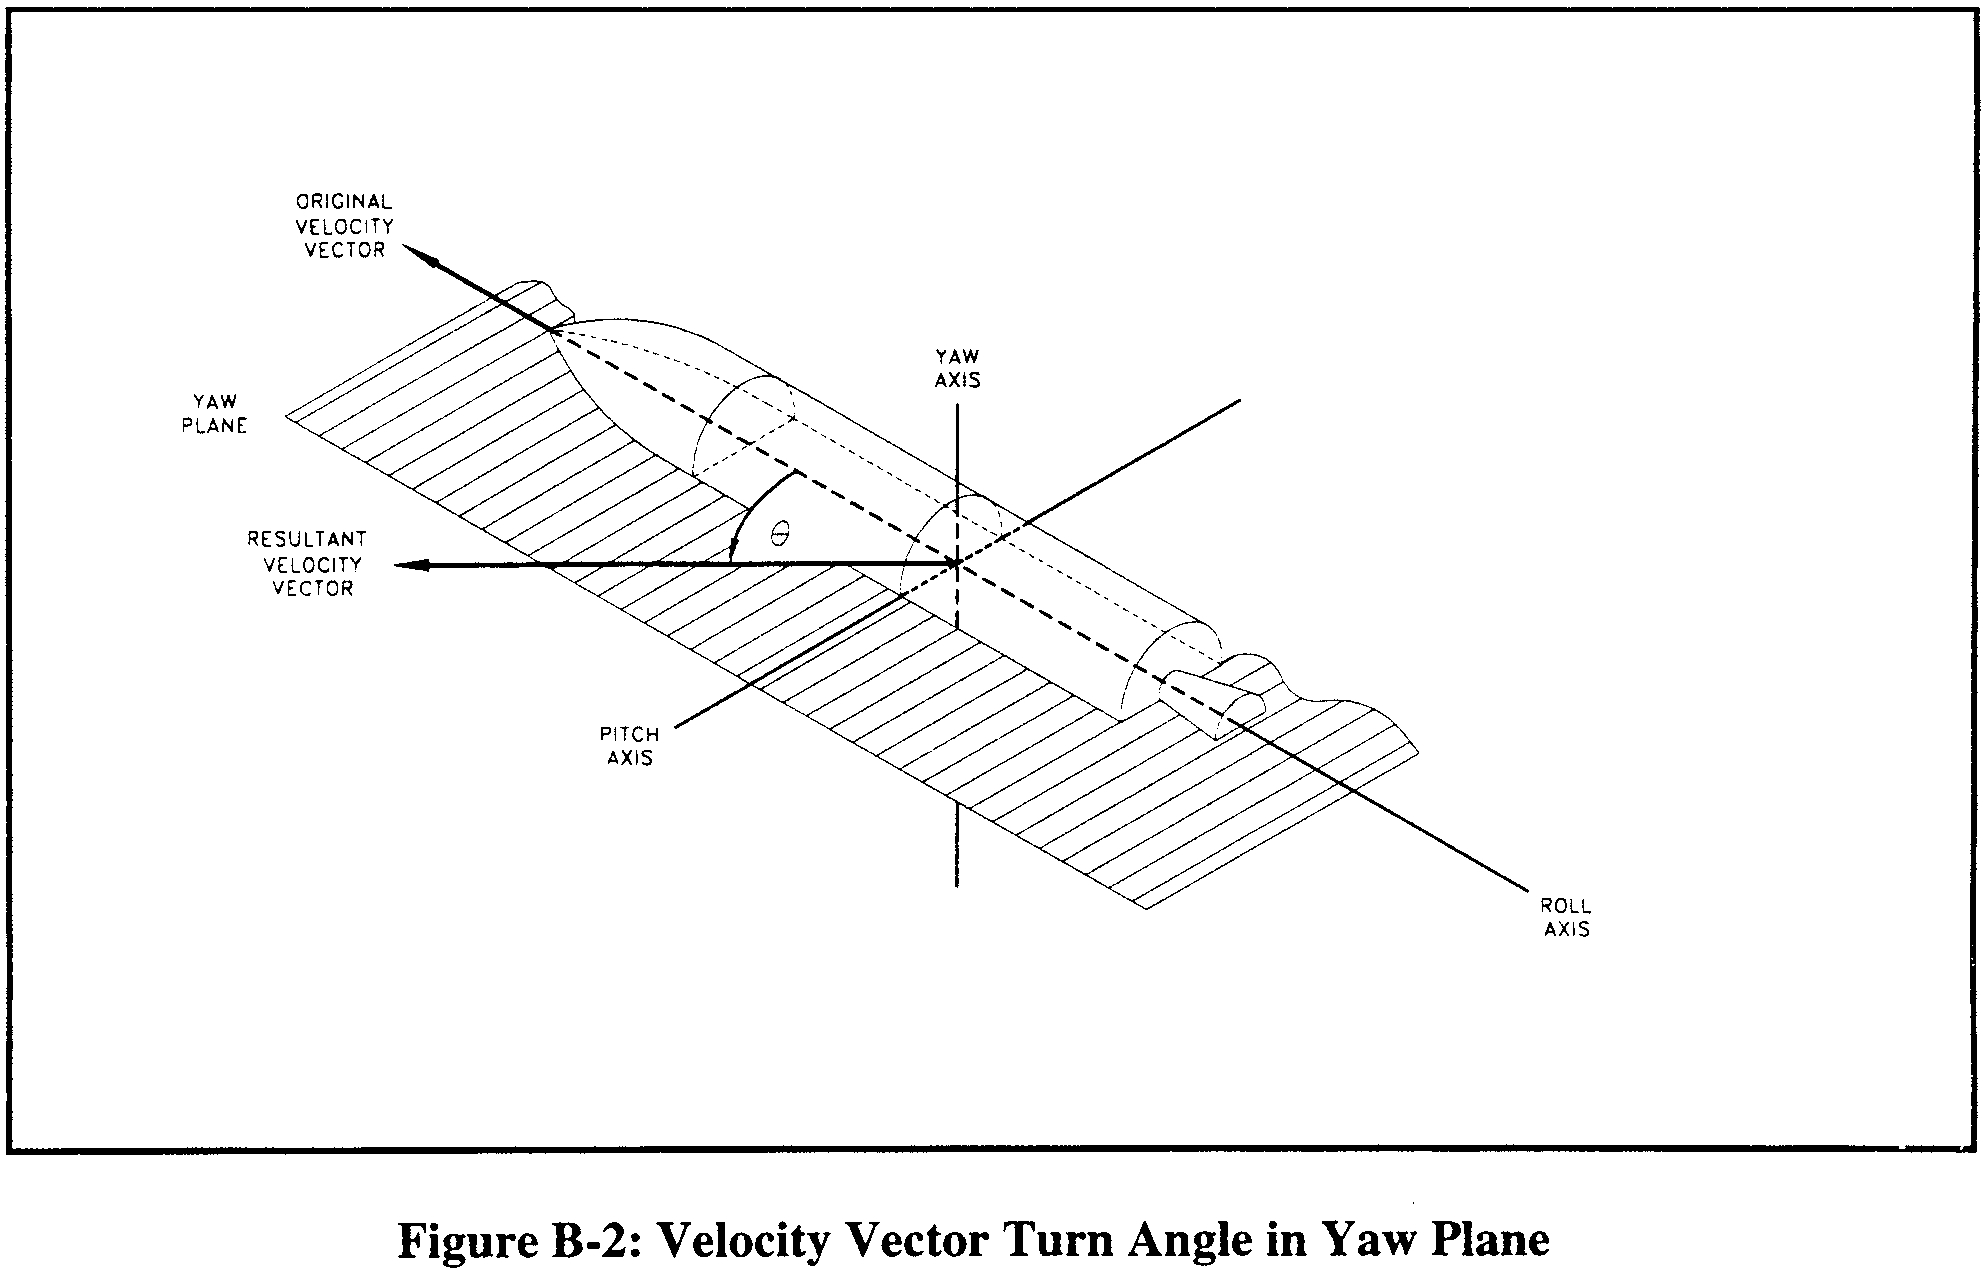 Graphic of The turn angle equations perform a turn in the launch vehicle's yaw plane, as depicted in figure B-2.